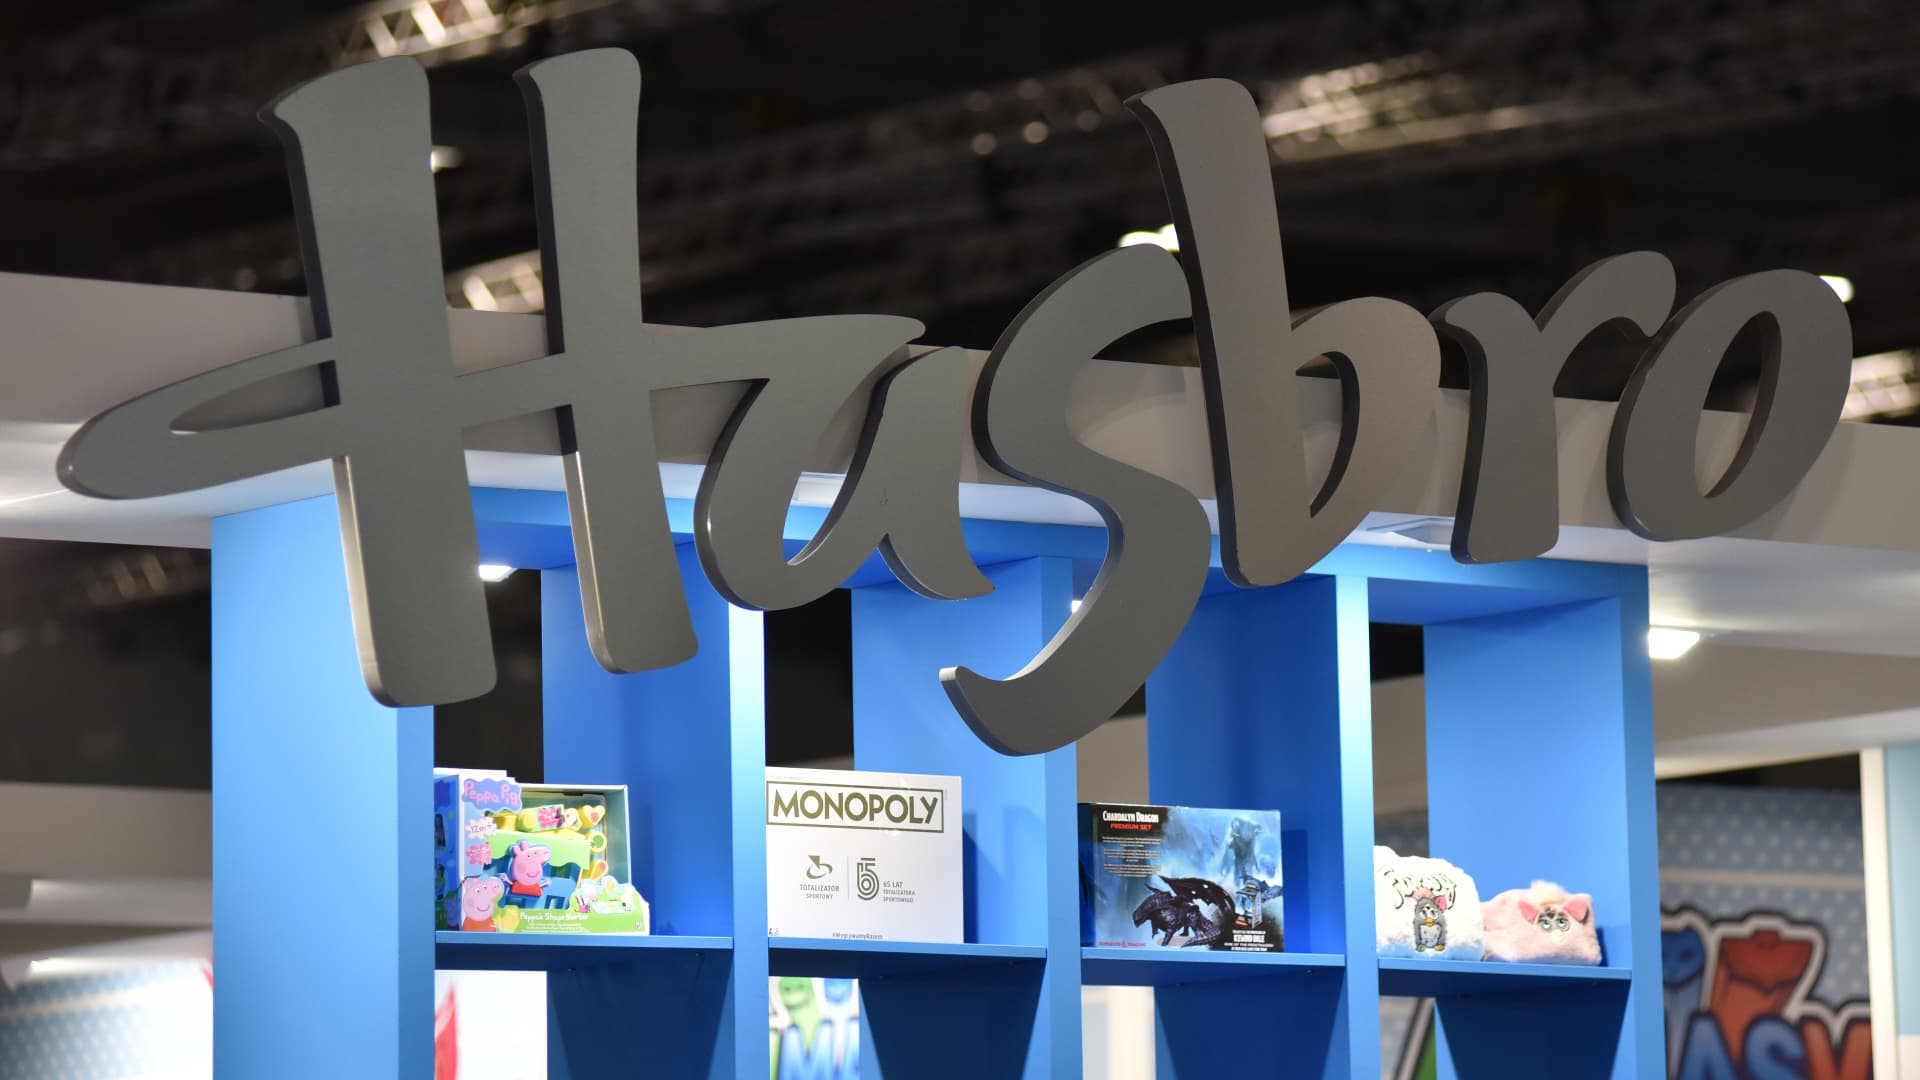 Hasbro stock plunges after revenue drop, downbeat outlook